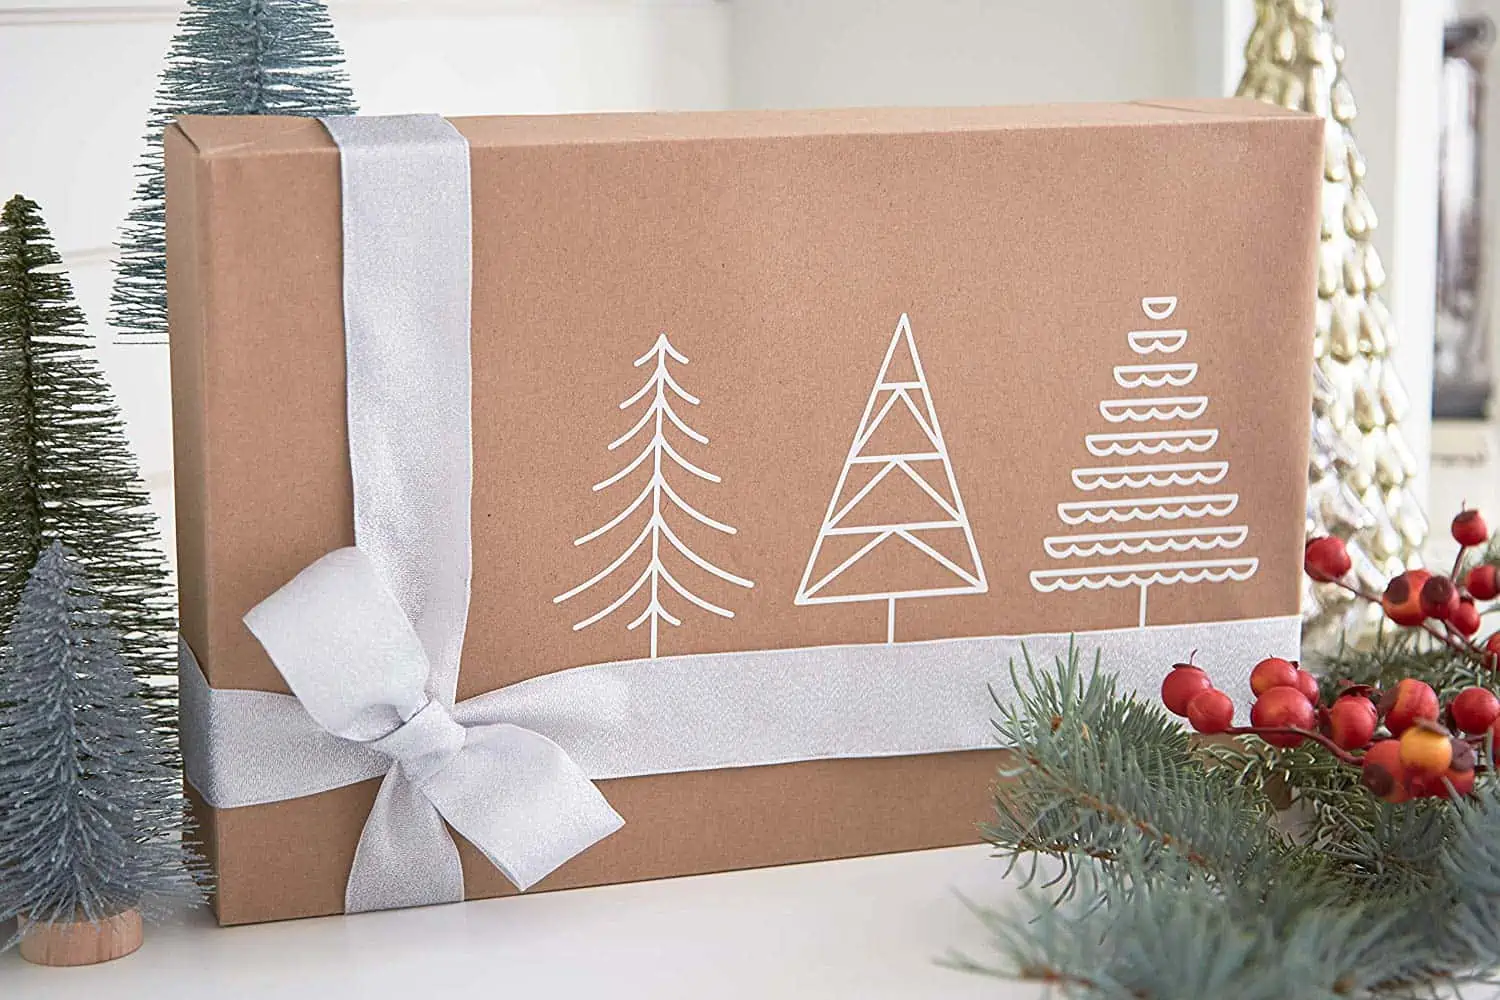 Create your own designs and decorate Christmas presents with a Cricut Explore Air 2 on sale.